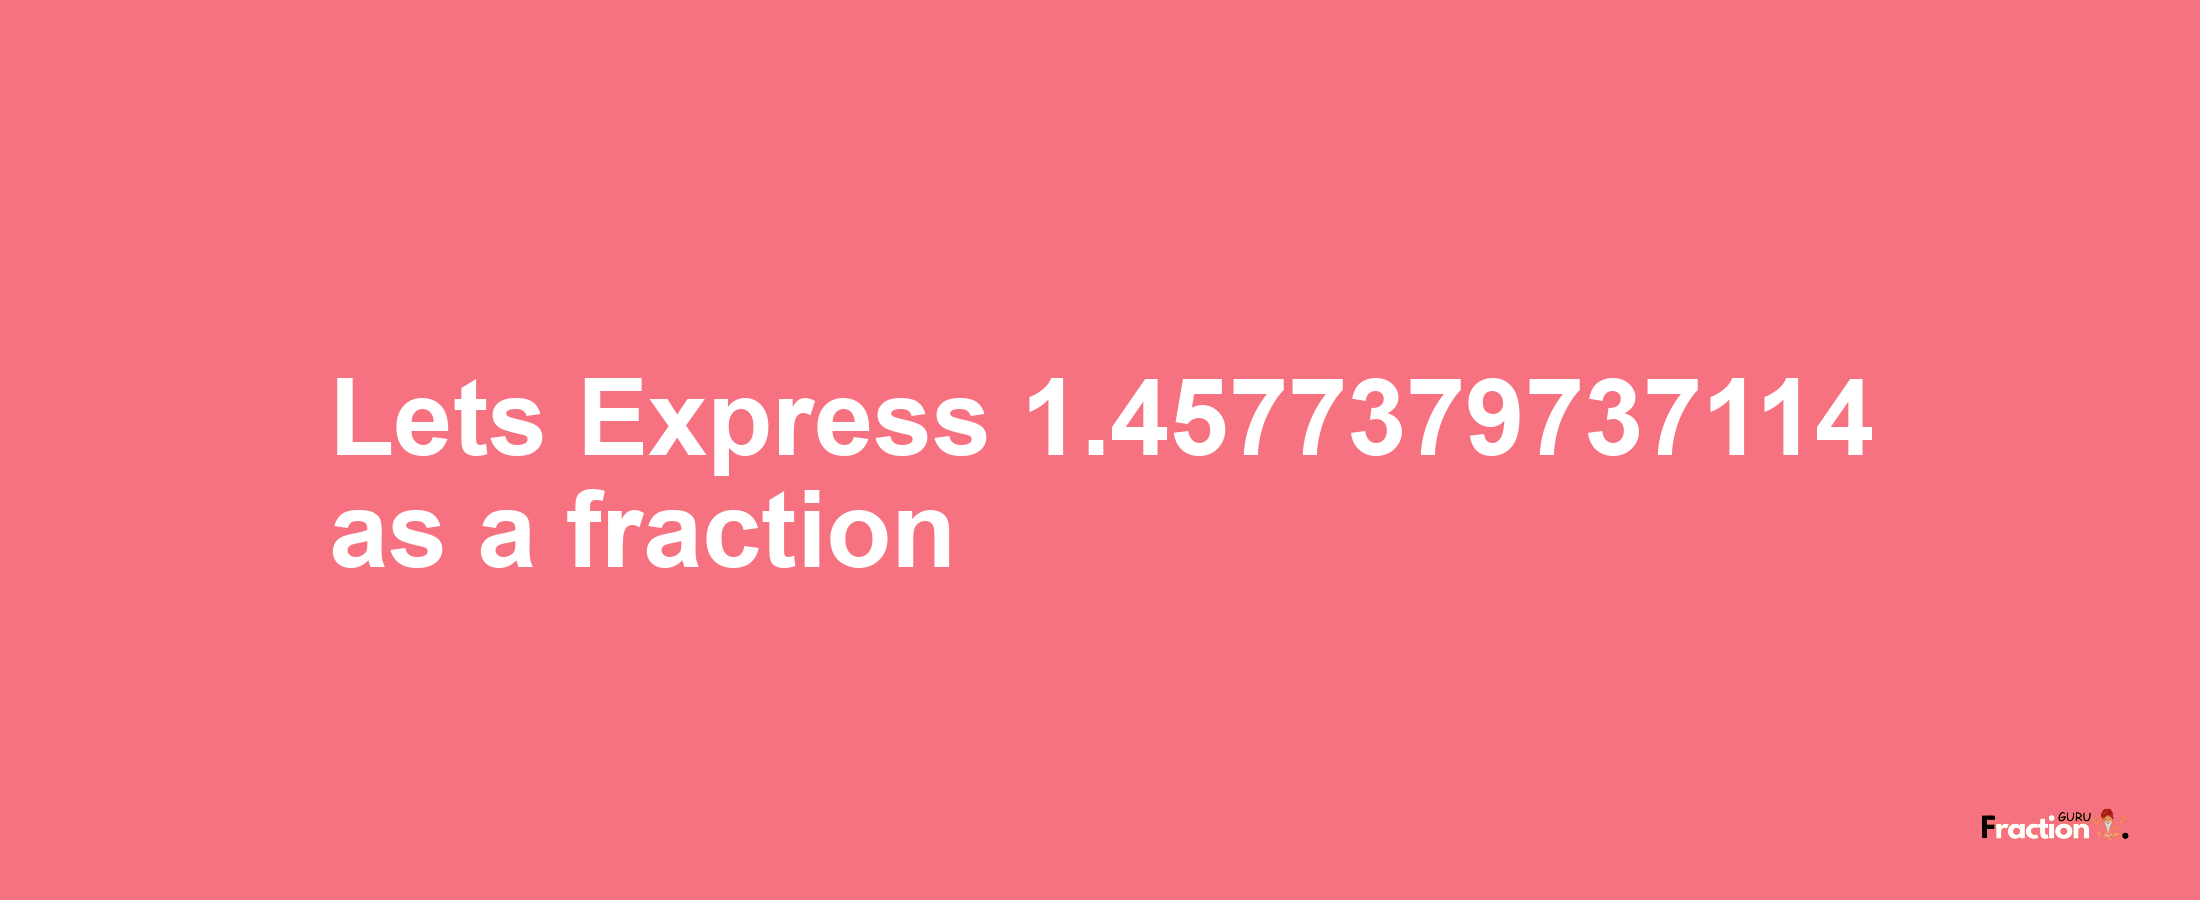 Lets Express 1.4577379737114 as afraction